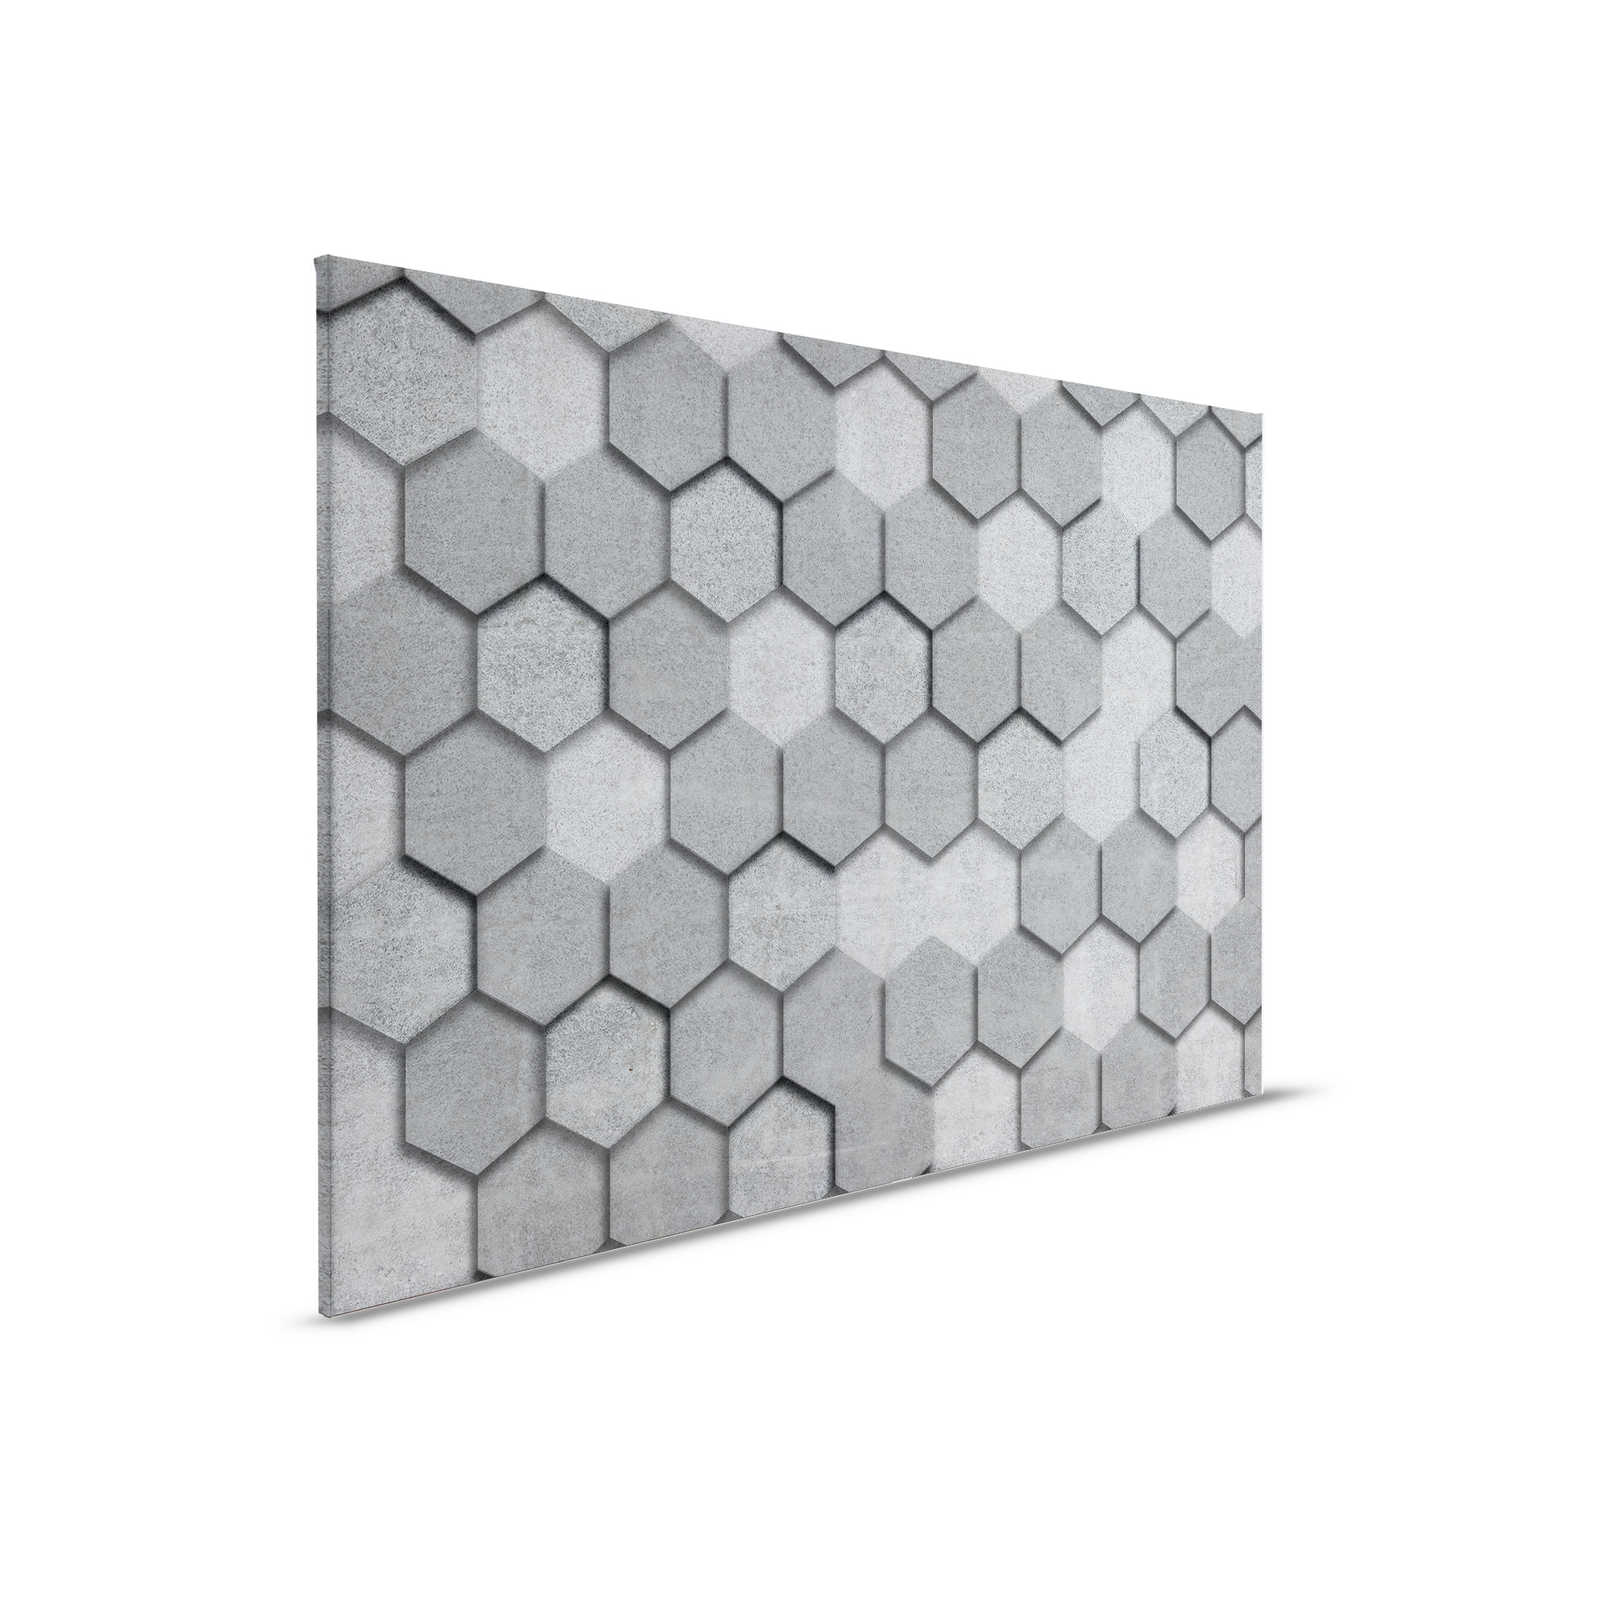         Canvas painting with geometric tiles hexagonal 3D look | grey, silver - 0.90 m x 0.60 m
    